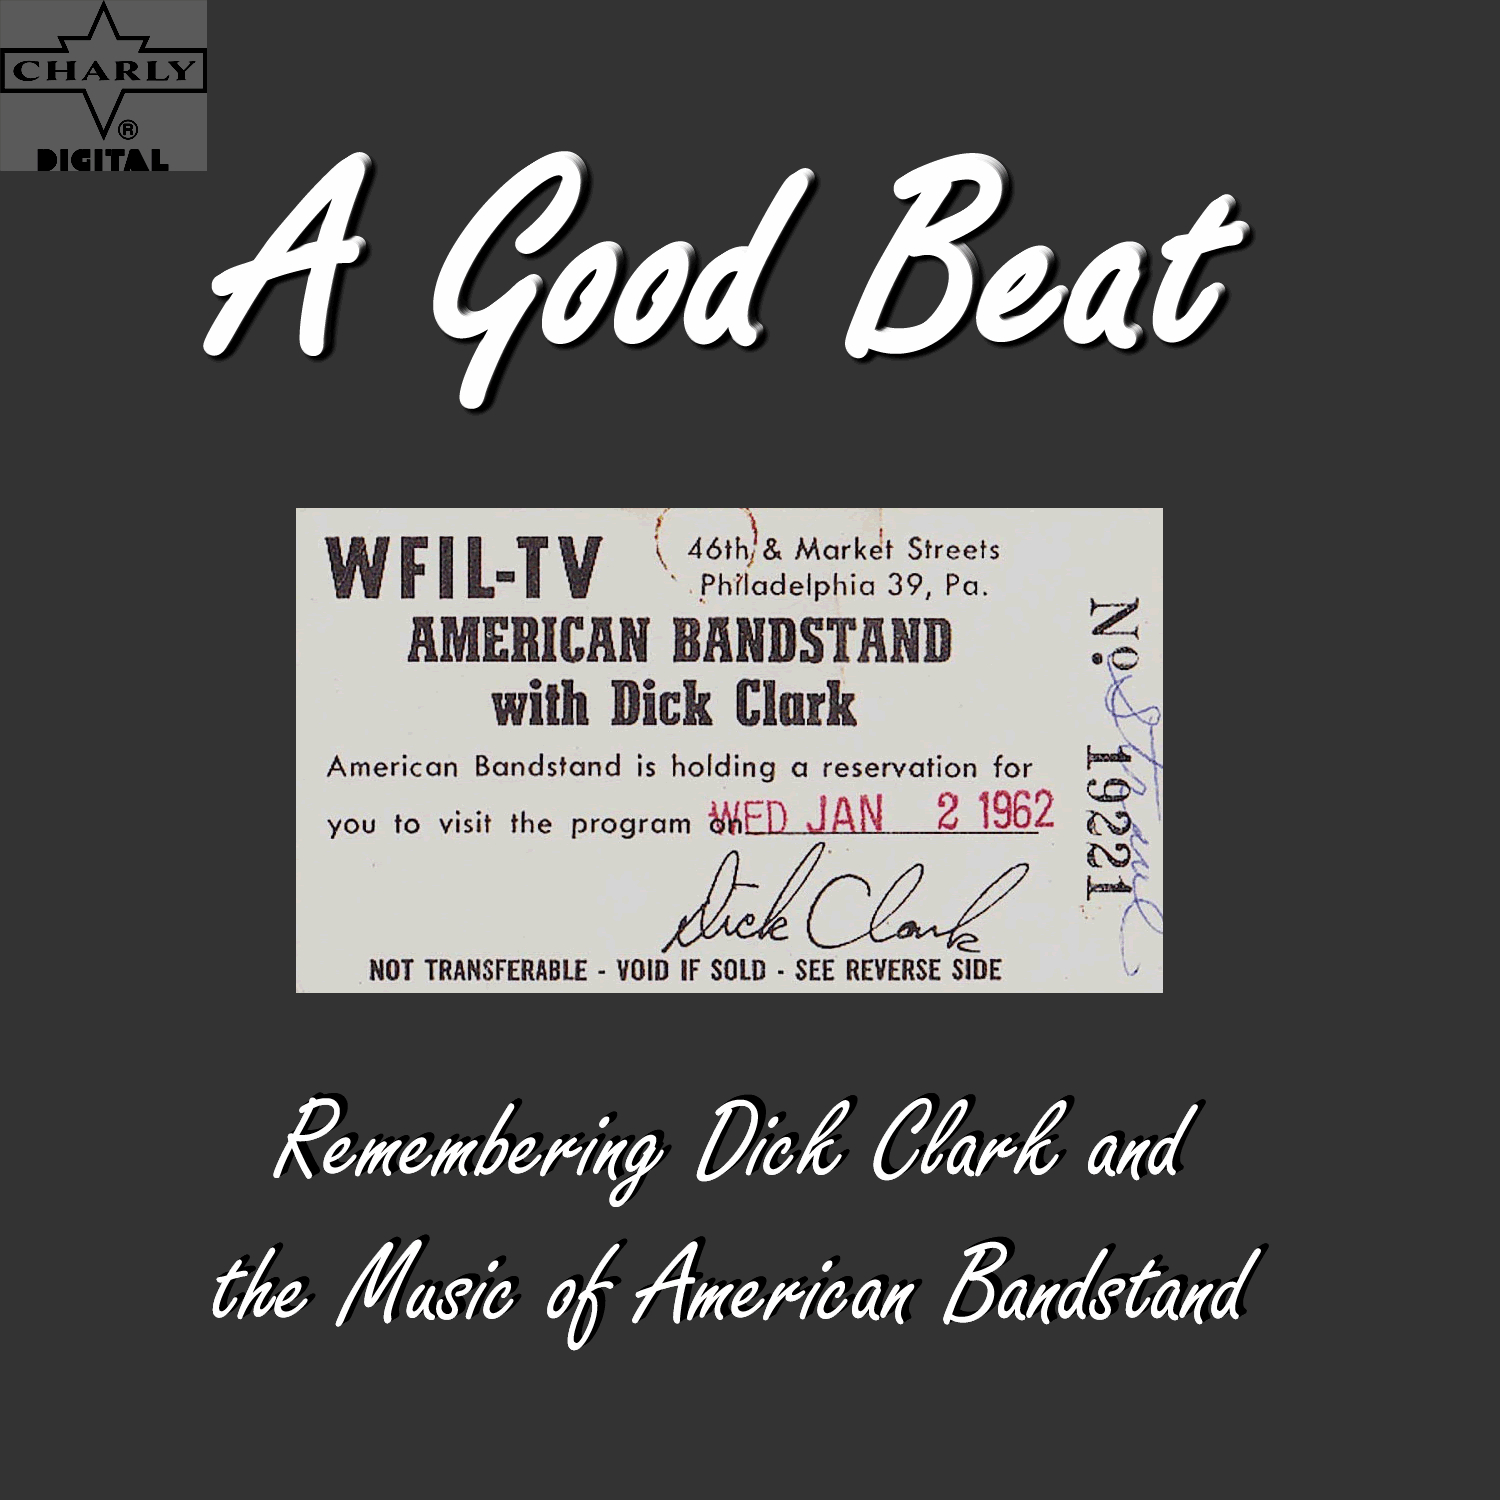 Dick clark's american bandstand what day was record review held